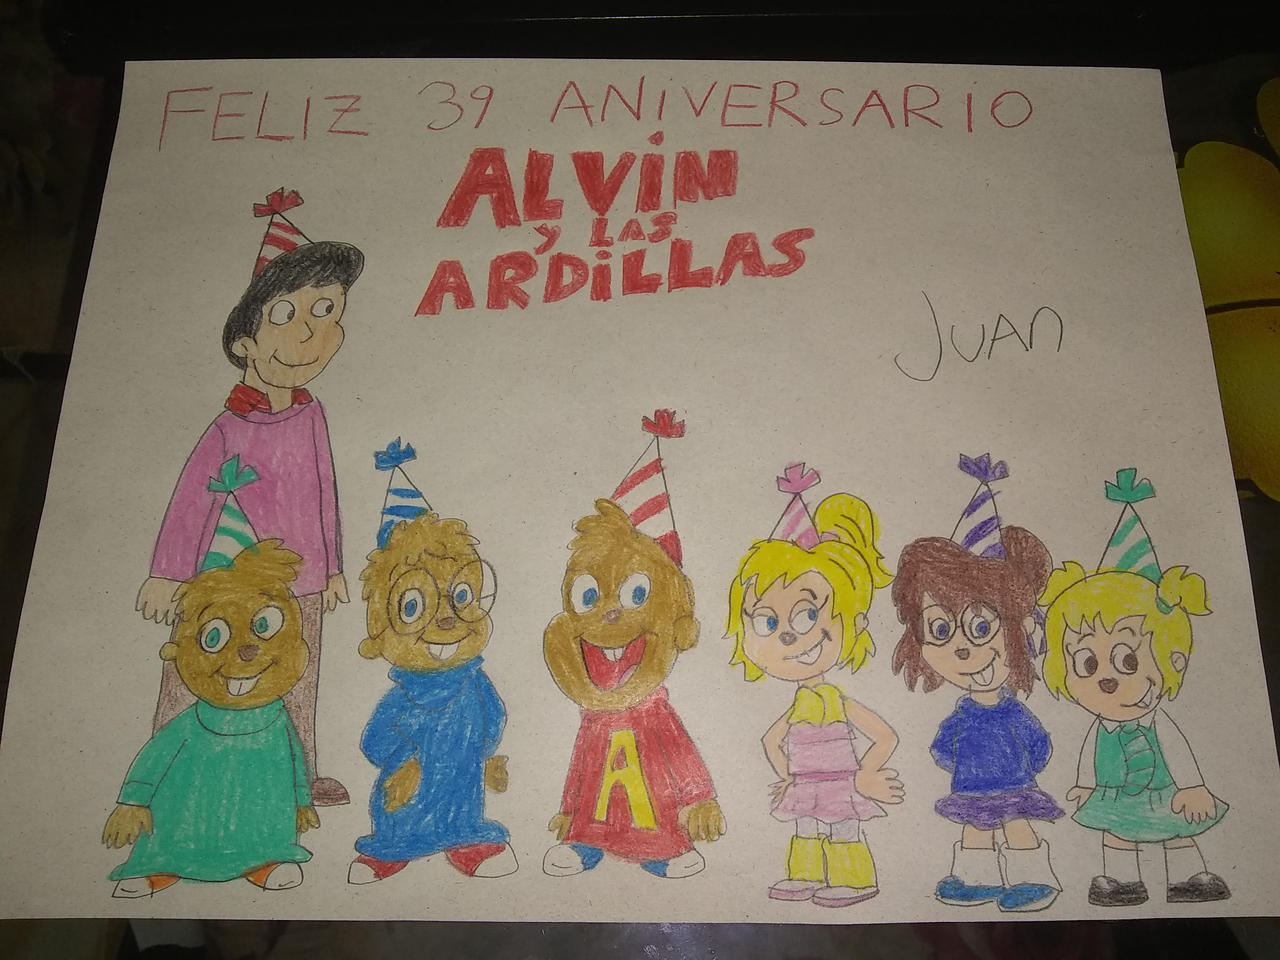 Happy 39 Years Alvin and the Chipmunks ( 2022 ) by Camelo2017 on DeviantArt